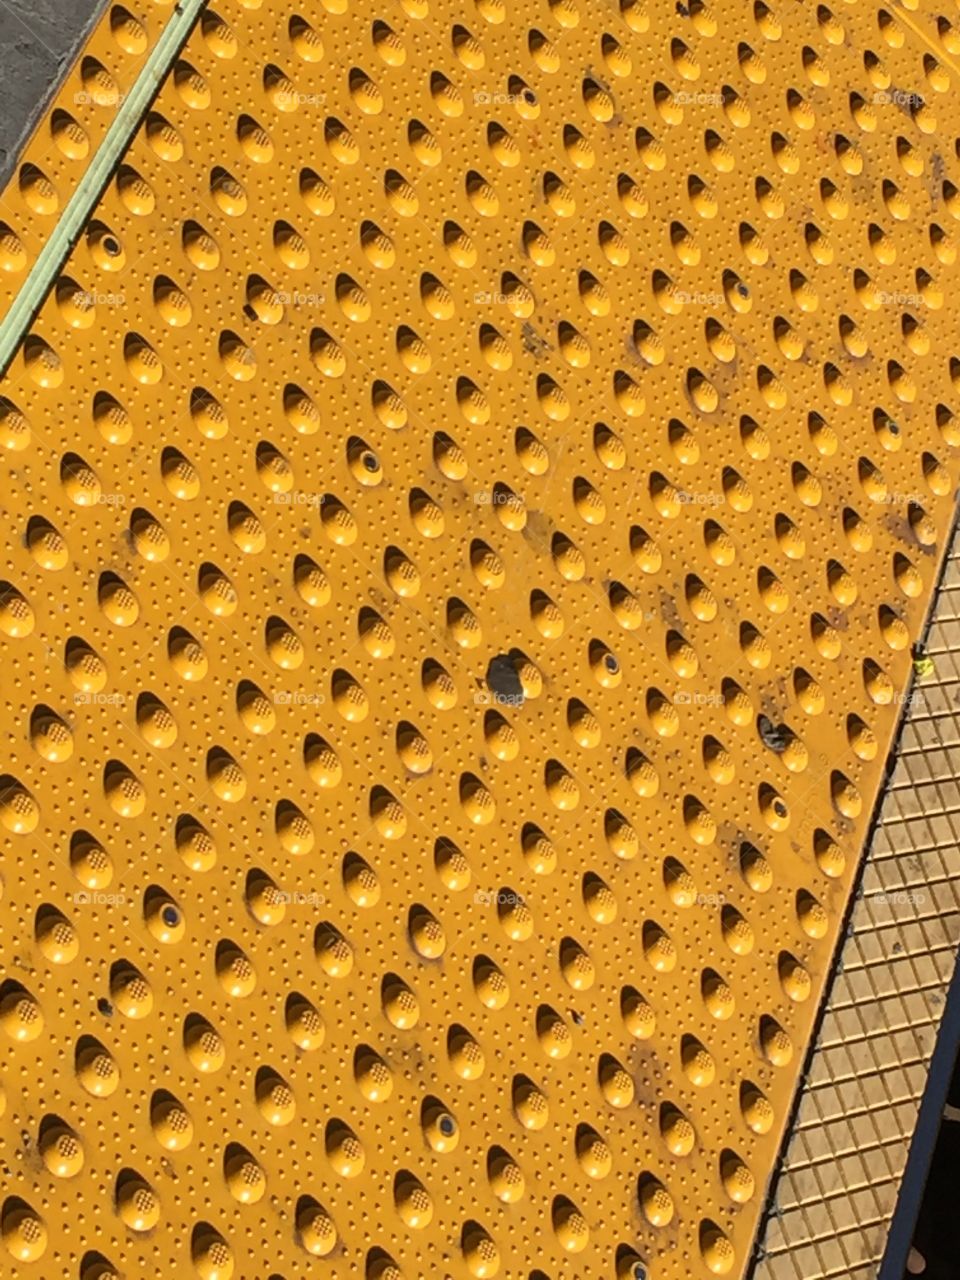 Yellow pavement on the train platforms . Yellow bumps separates waiting passengers from train.